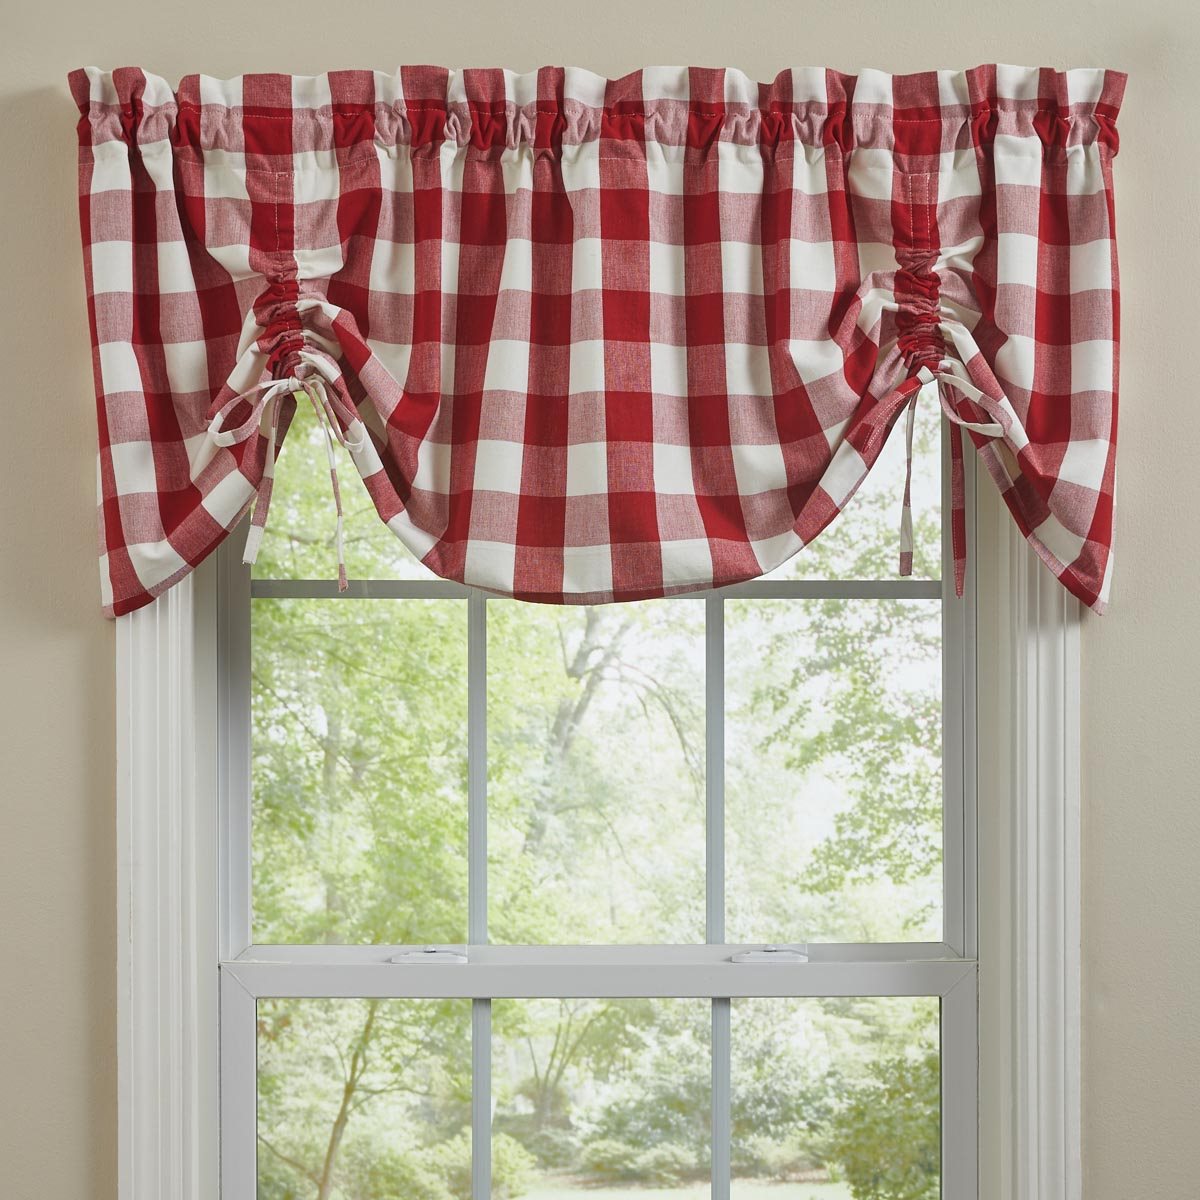 Wicklow Check Lined Farmhouse Valance - Red/Cream